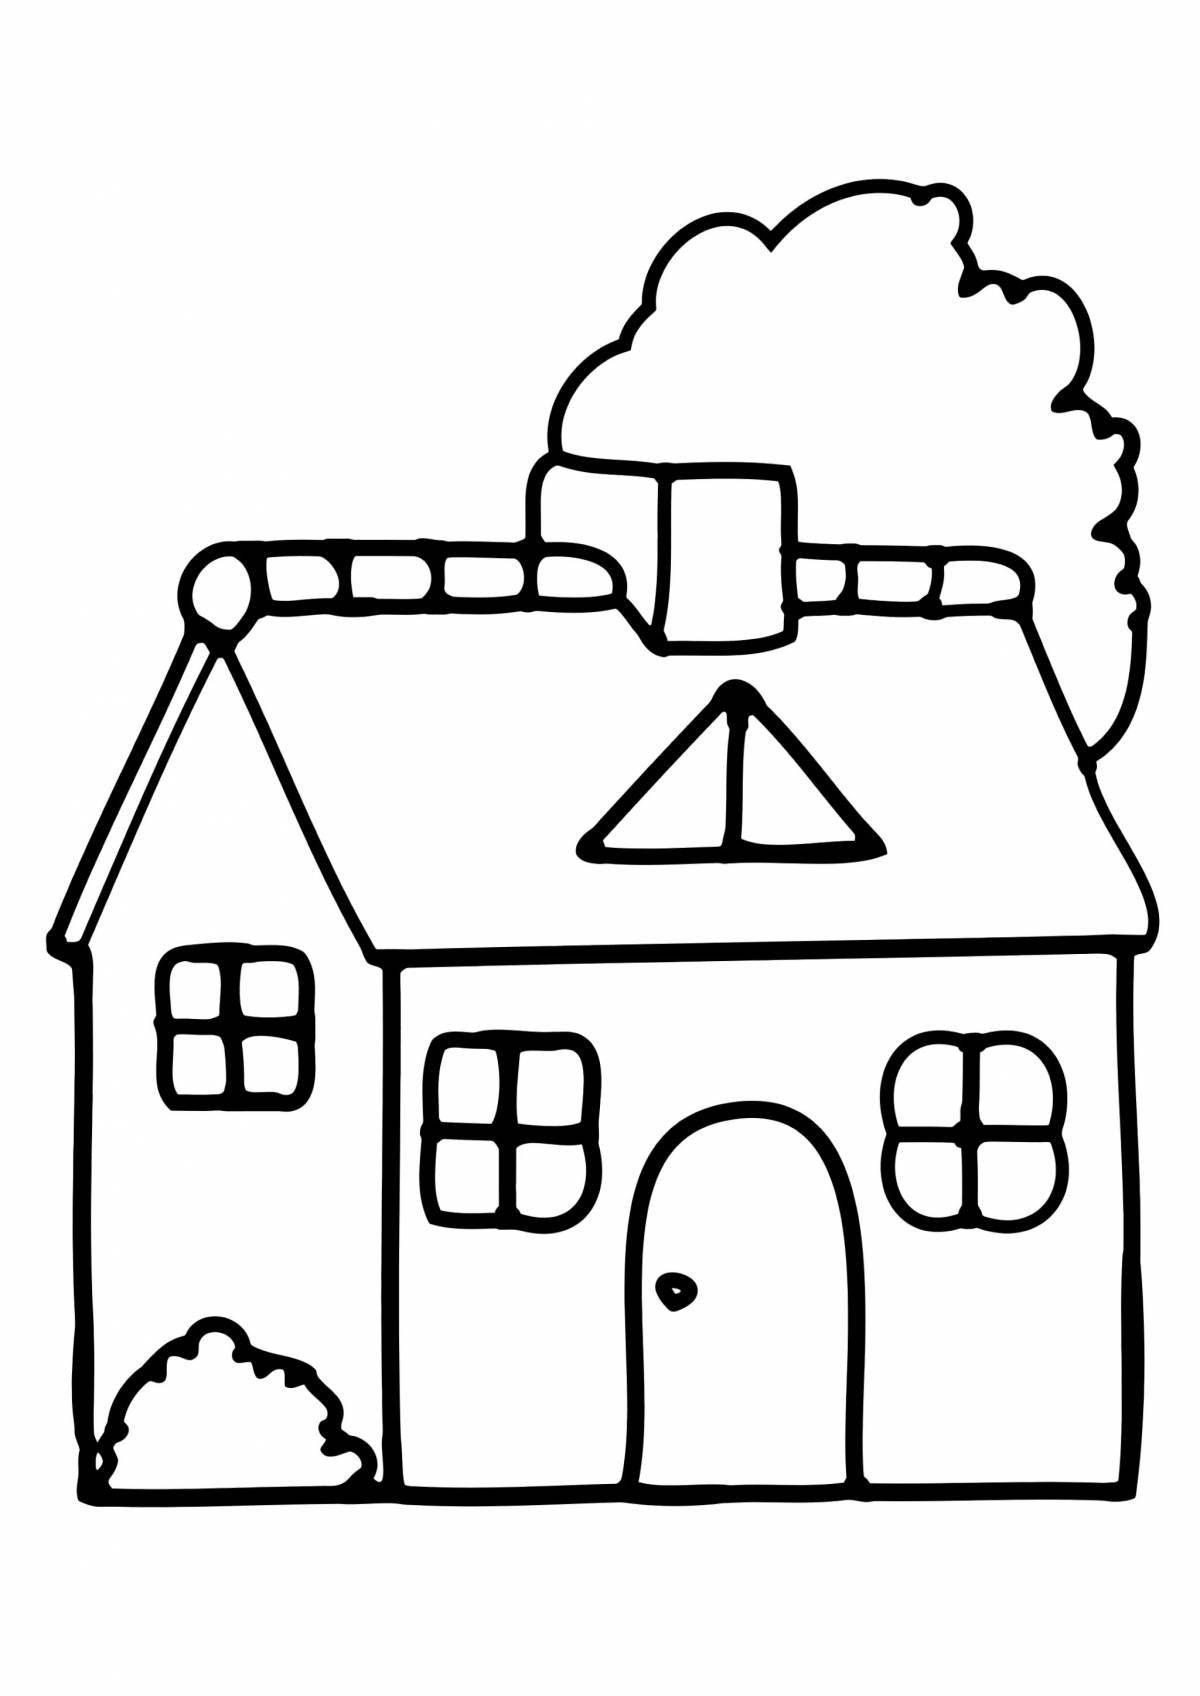 Cute big house coloring pages for kids